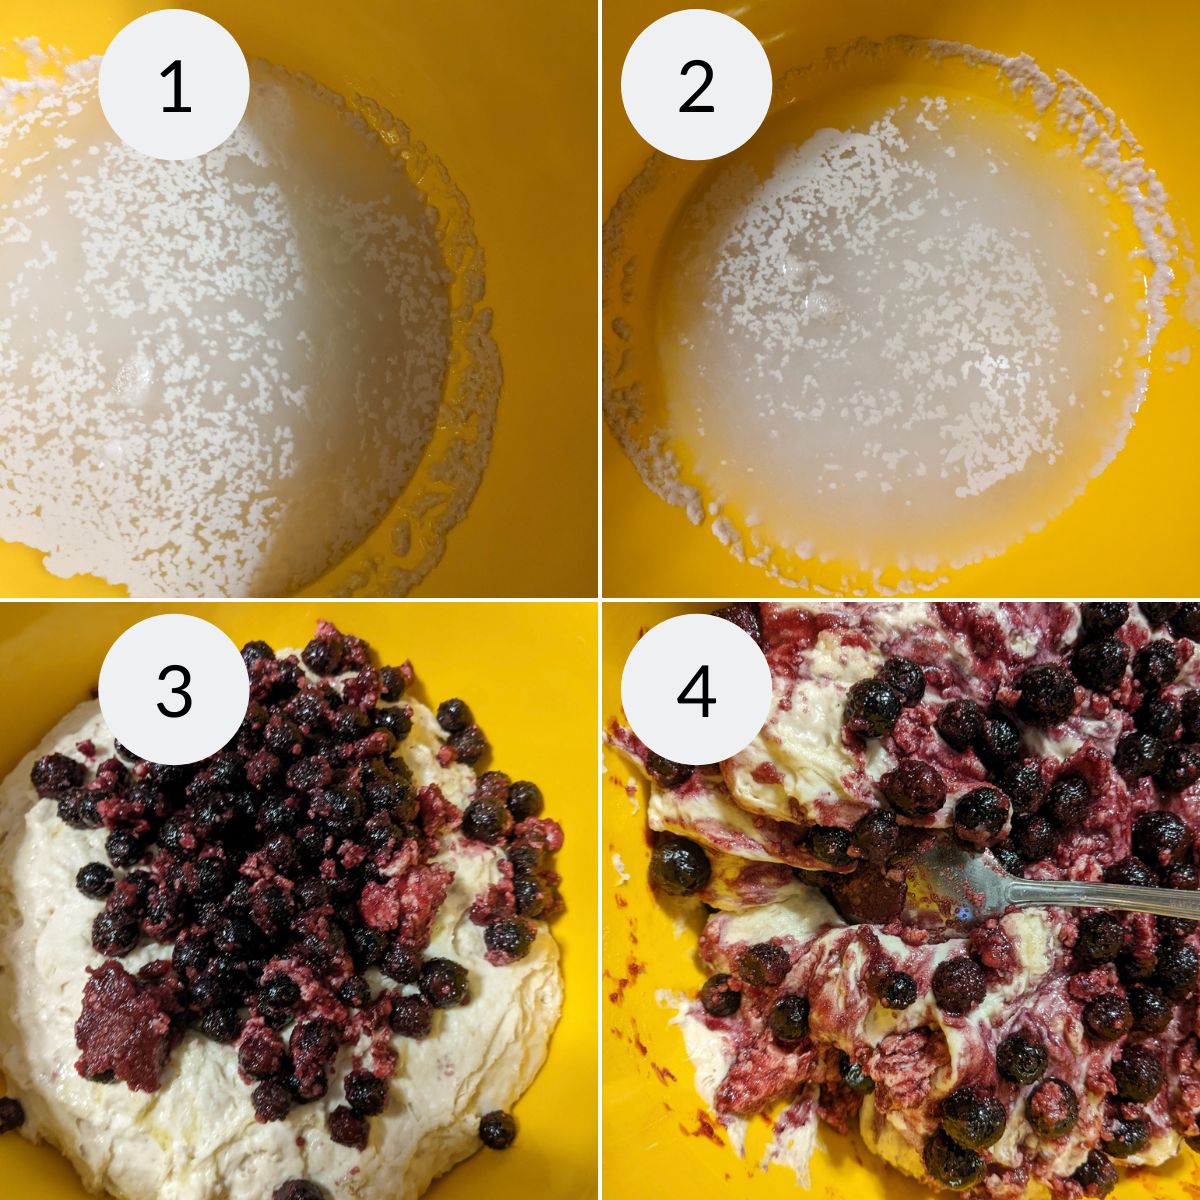 Mixing the dry ingredients for the donuts, then adding the wet and finally the blueberries.